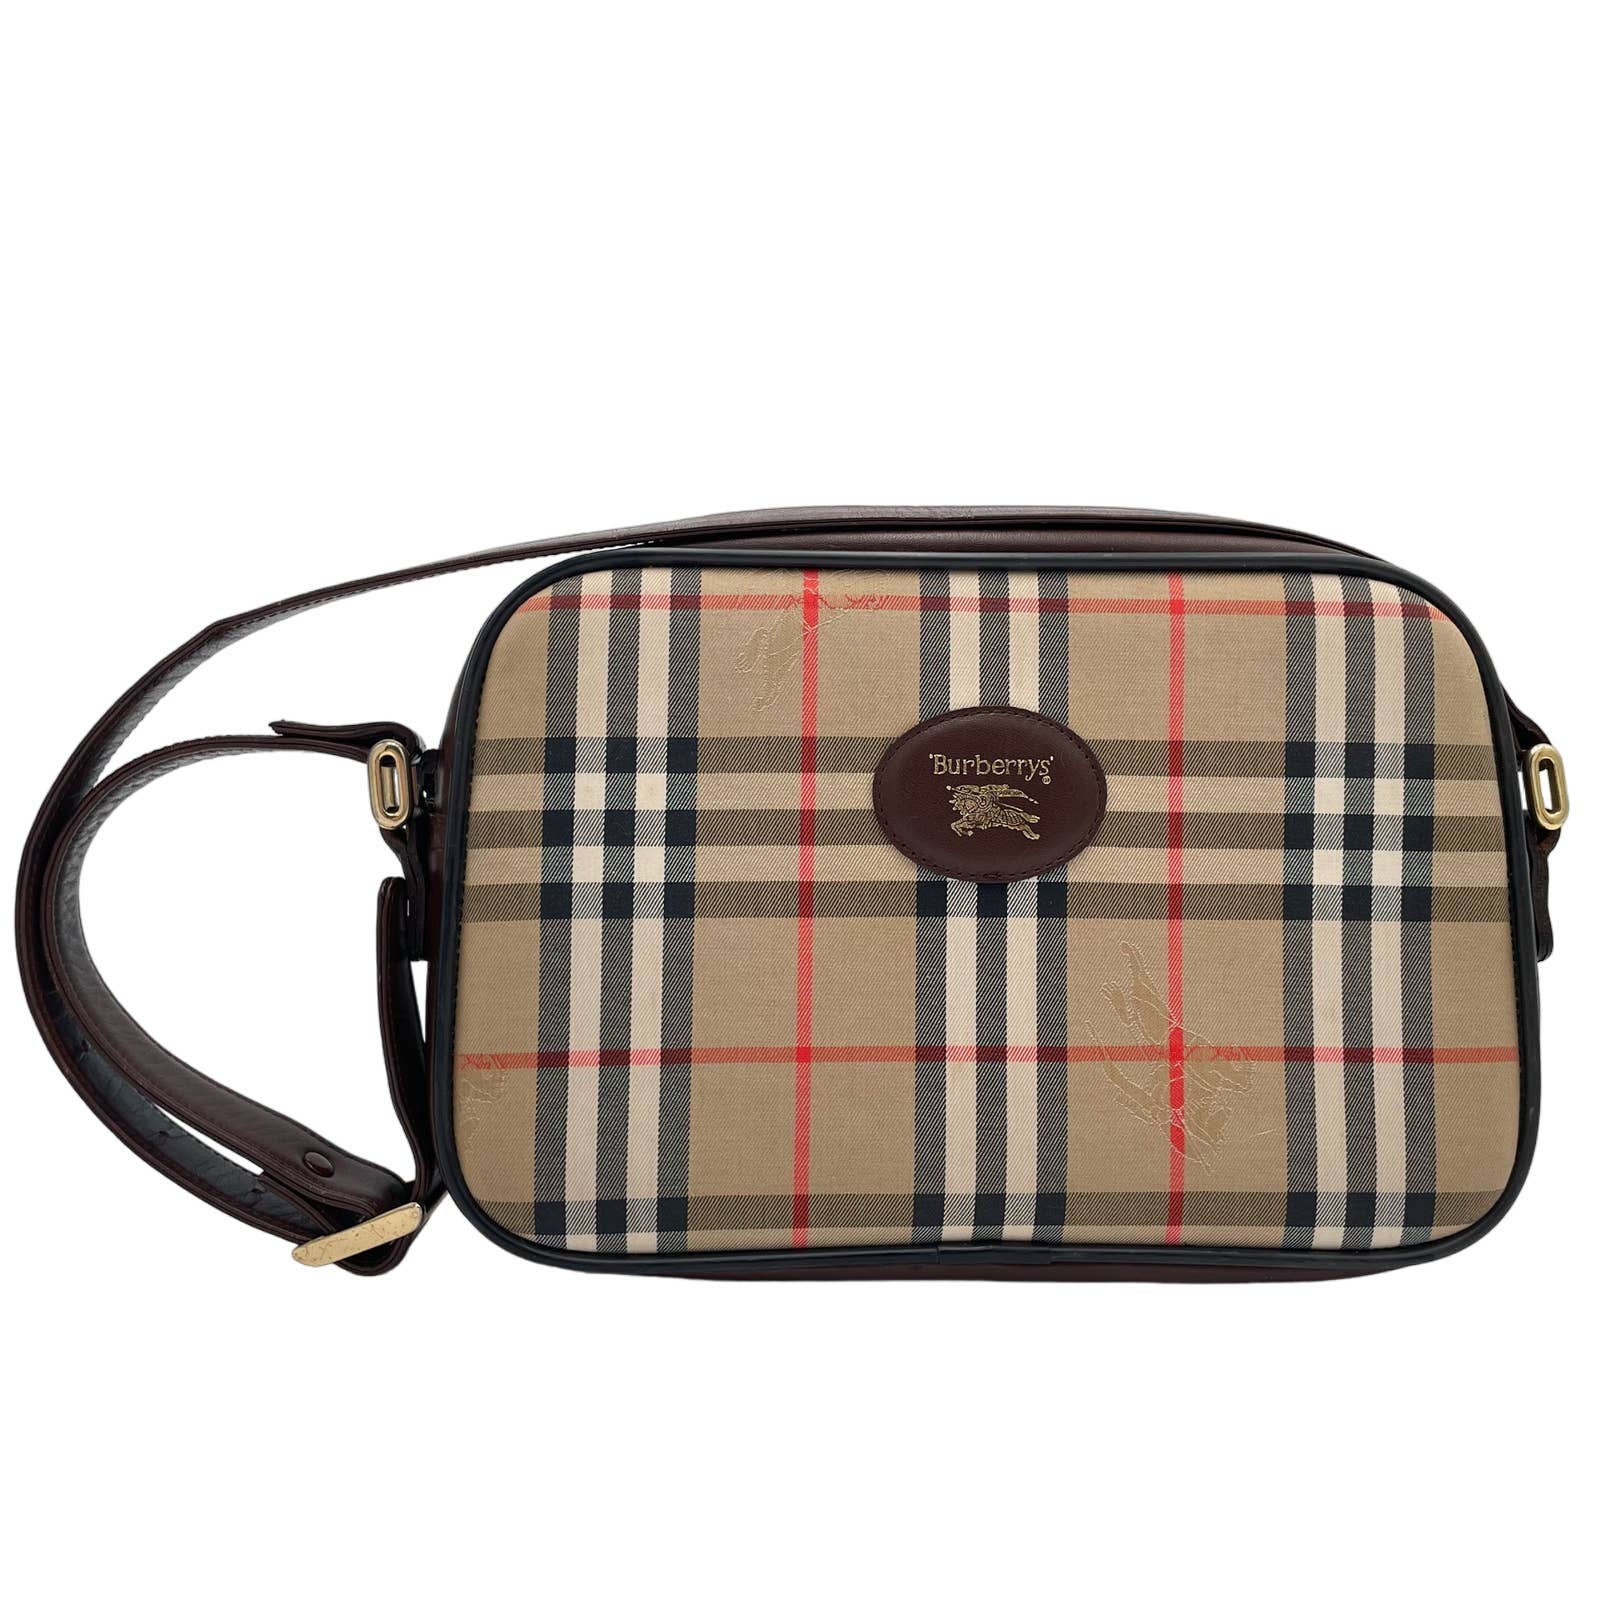 A rectangular Burberry Crossbody Bag featuring the signature beige, black, red, and white pattern. The bag has a dark brown adjustable leather strap and a brown leather patch with the brand's logo embossed on the front.